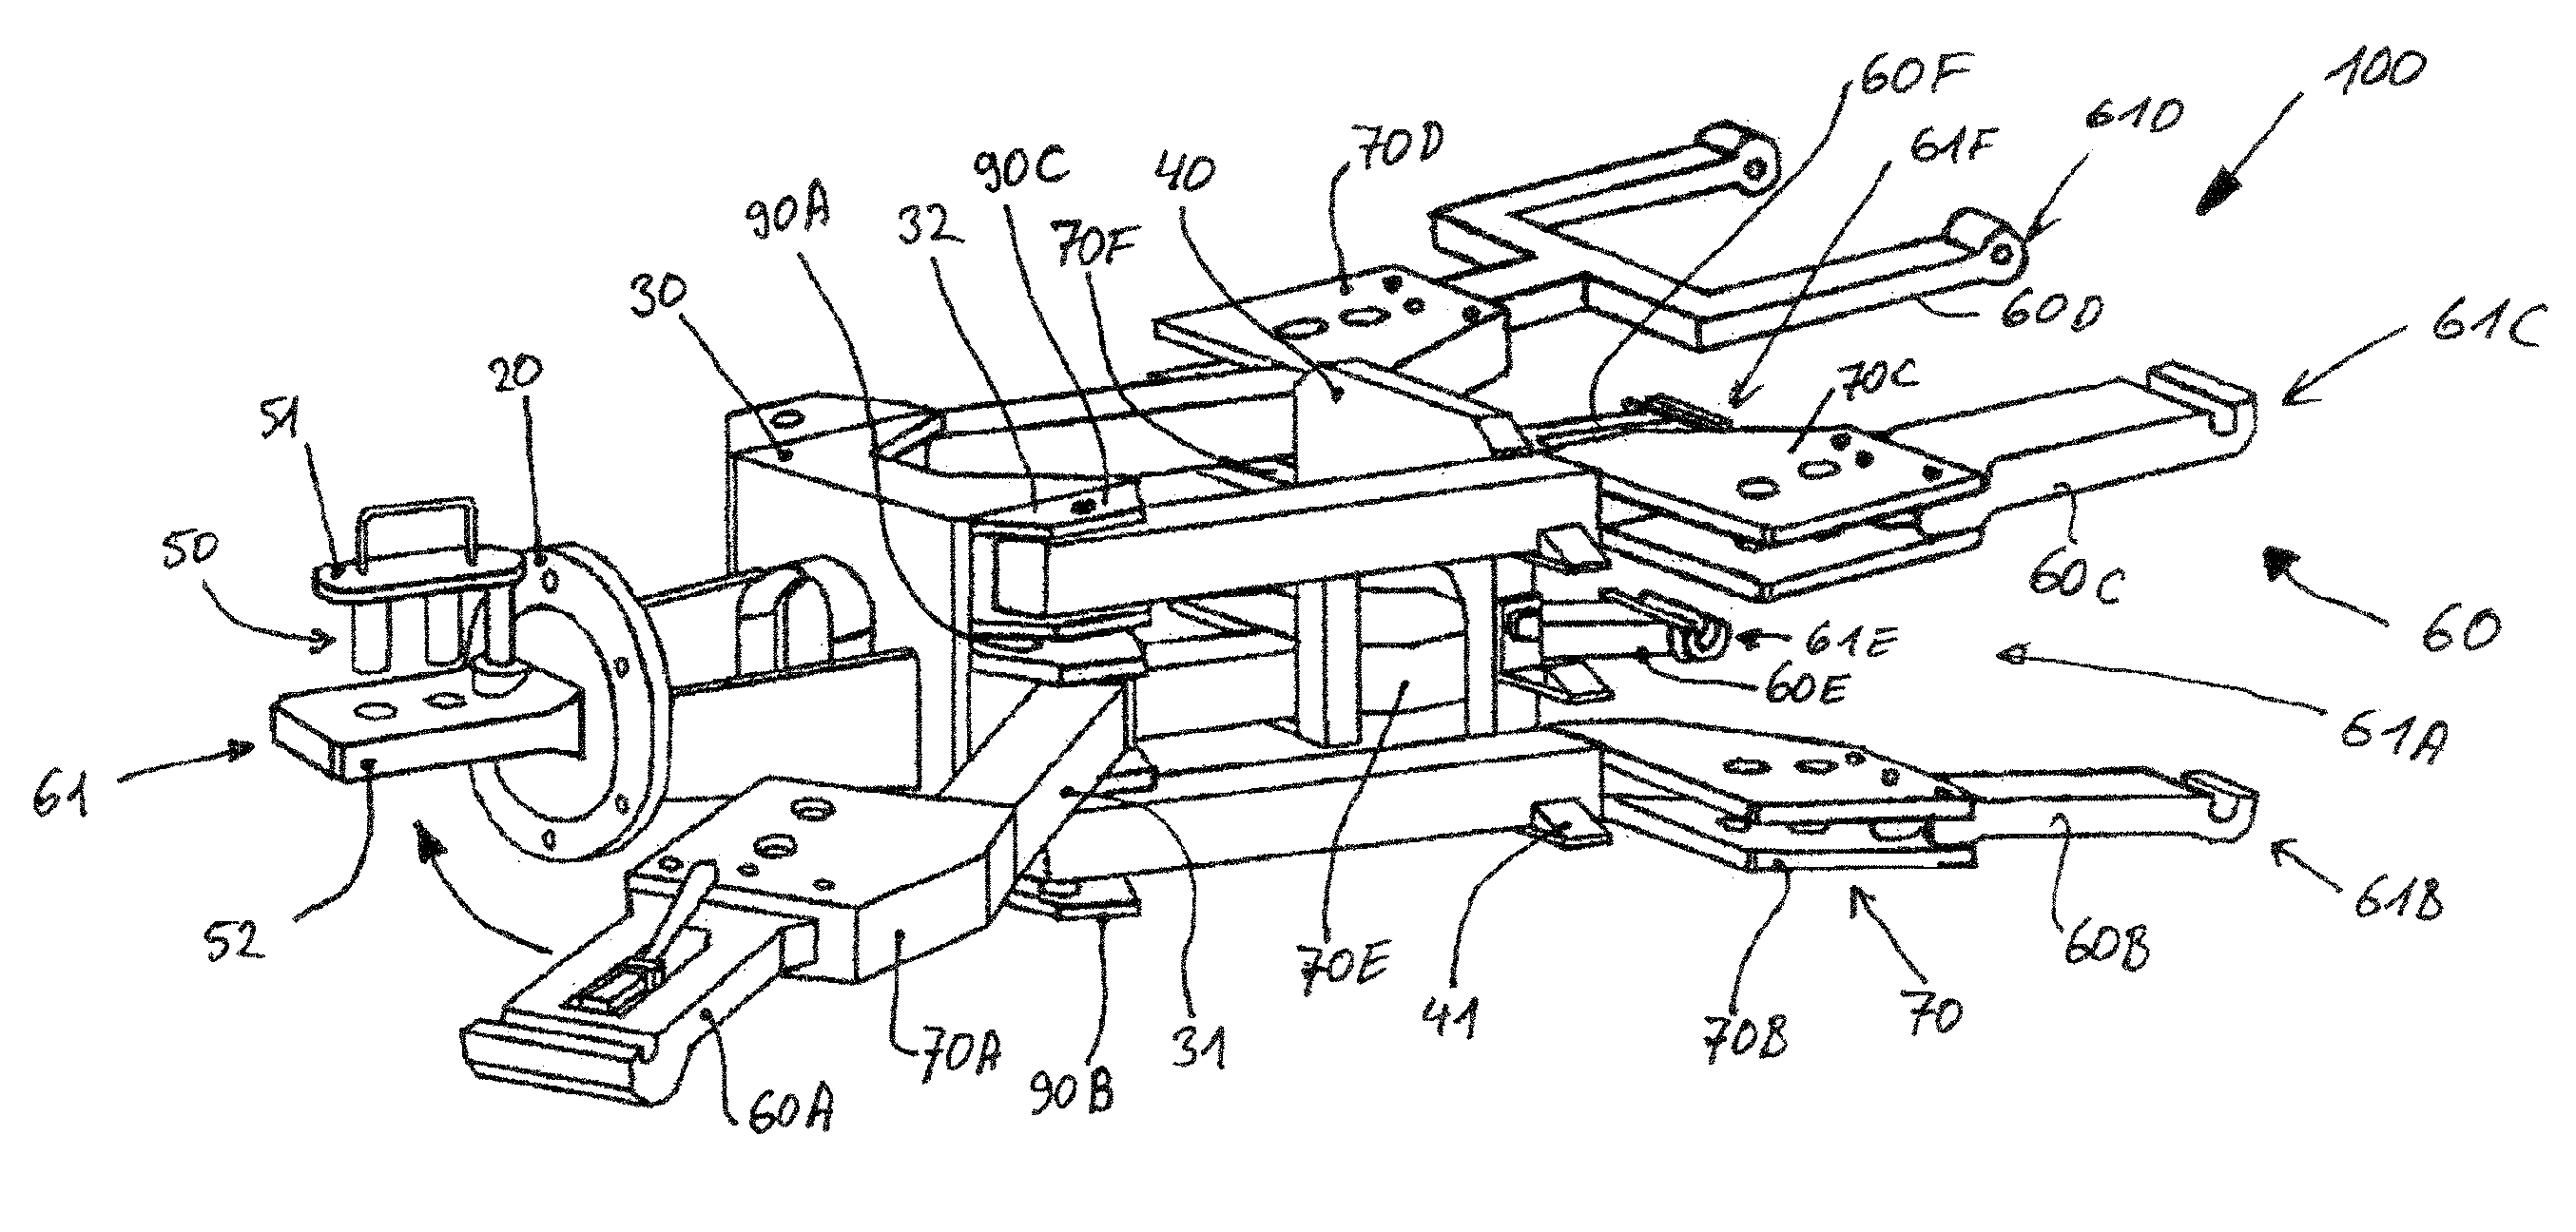 Coupling device for different landing gears of aircraft